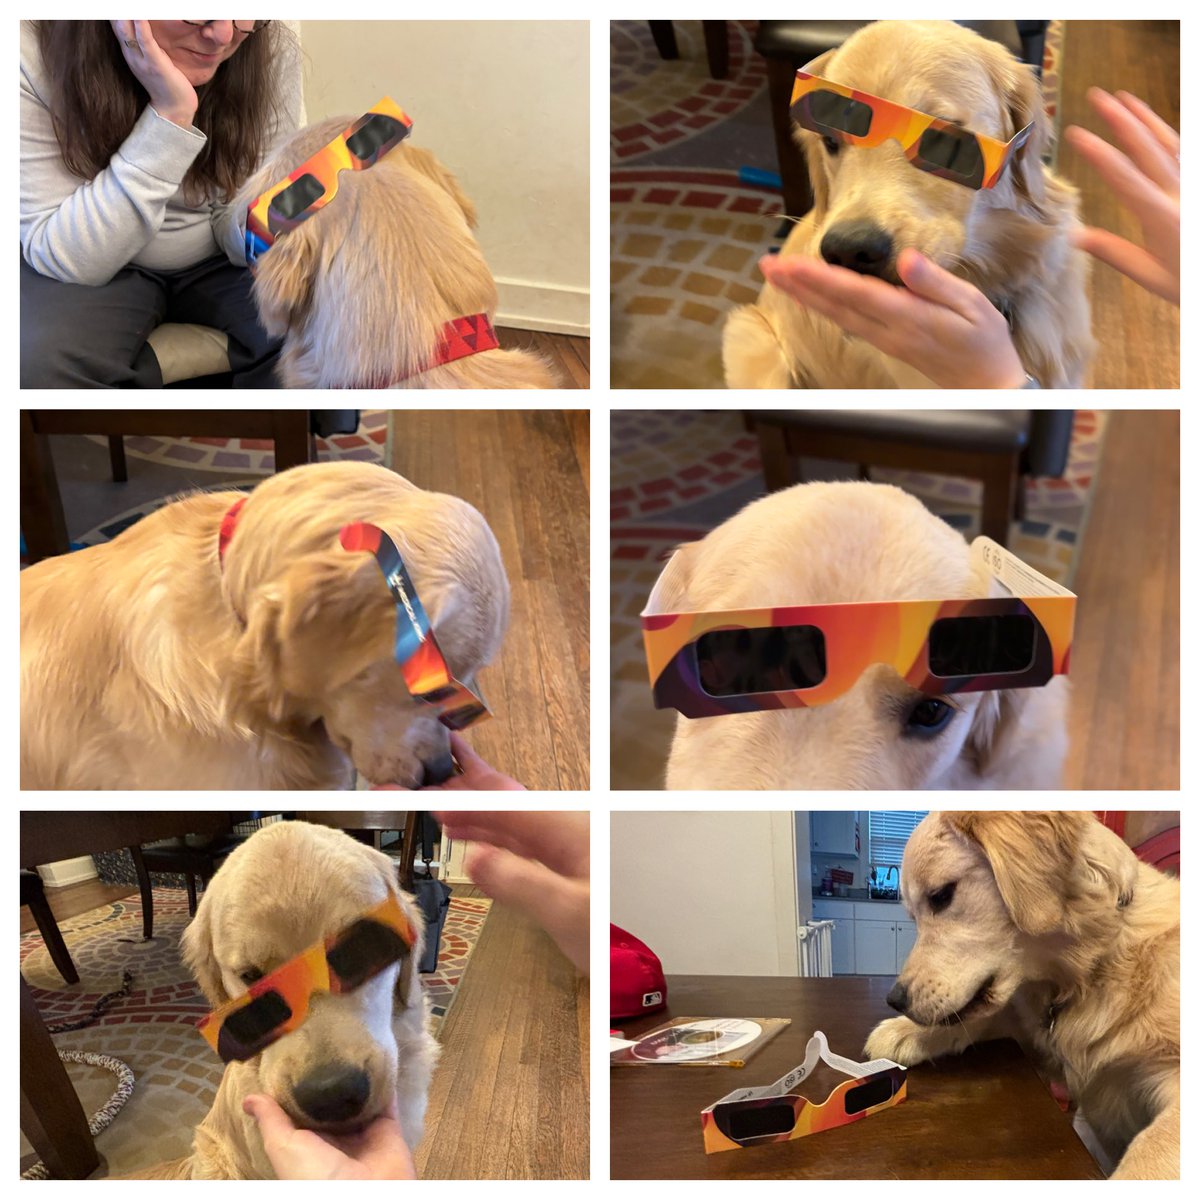 Here are some outtakes from the photo shoot for today’s big yellow sky ball event. I did not get peanut butter. #Eclipse #Eclipse2024 #TotalEclipse #TotalEclipseOfTheHeart #TotalEclipseOfTheHeart2024 

#DogsOfTwitter #GoldenRetrievers